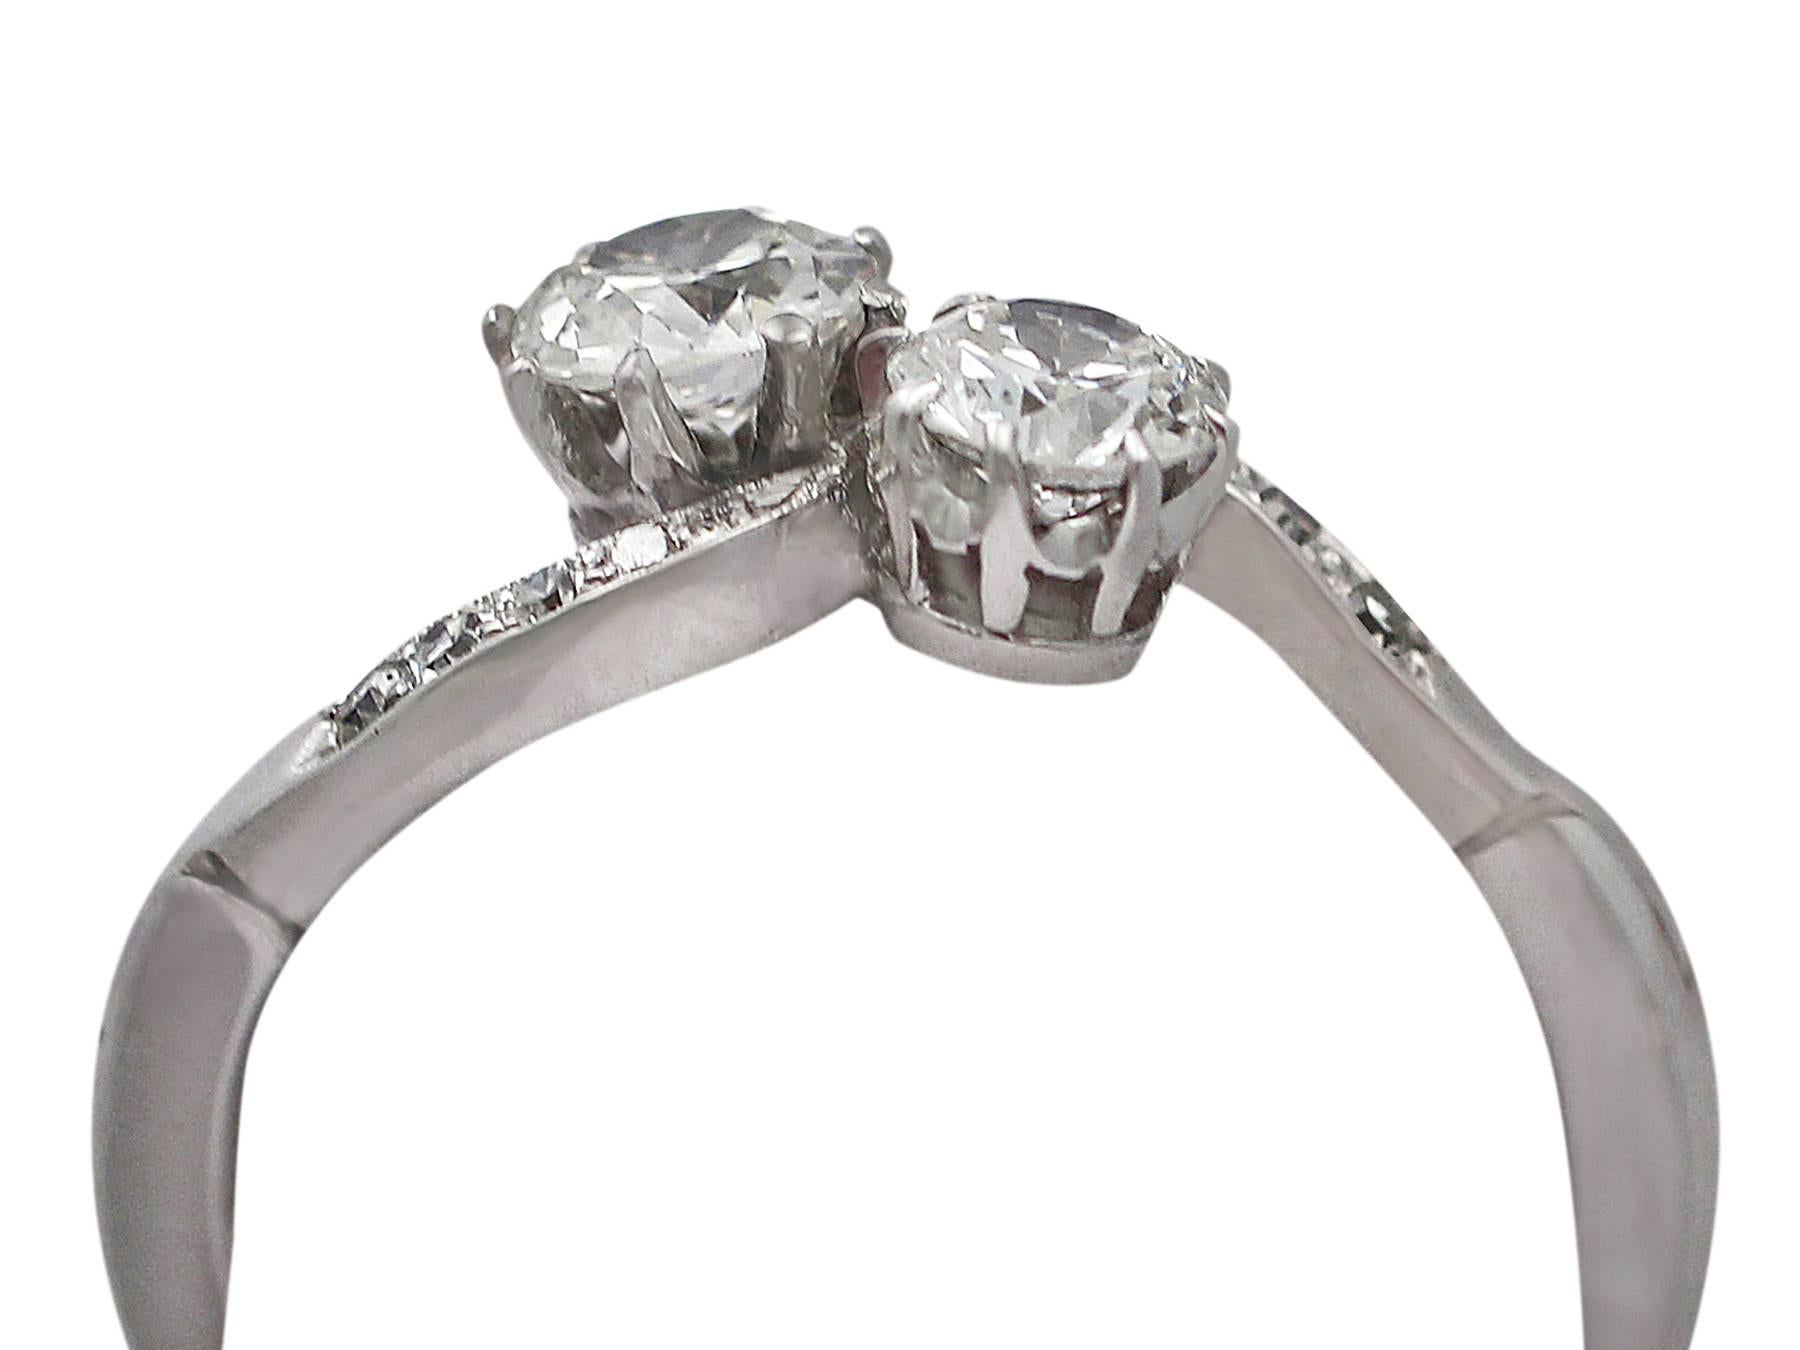 A fine and impressive 0.75 carat diamond, 18 karat white gold, platinum set twist ring; an addition to our antique jewelry collection

This fine antique two-stone diamond twist ring has been crafted in 18k white gold with platinum settings.

The